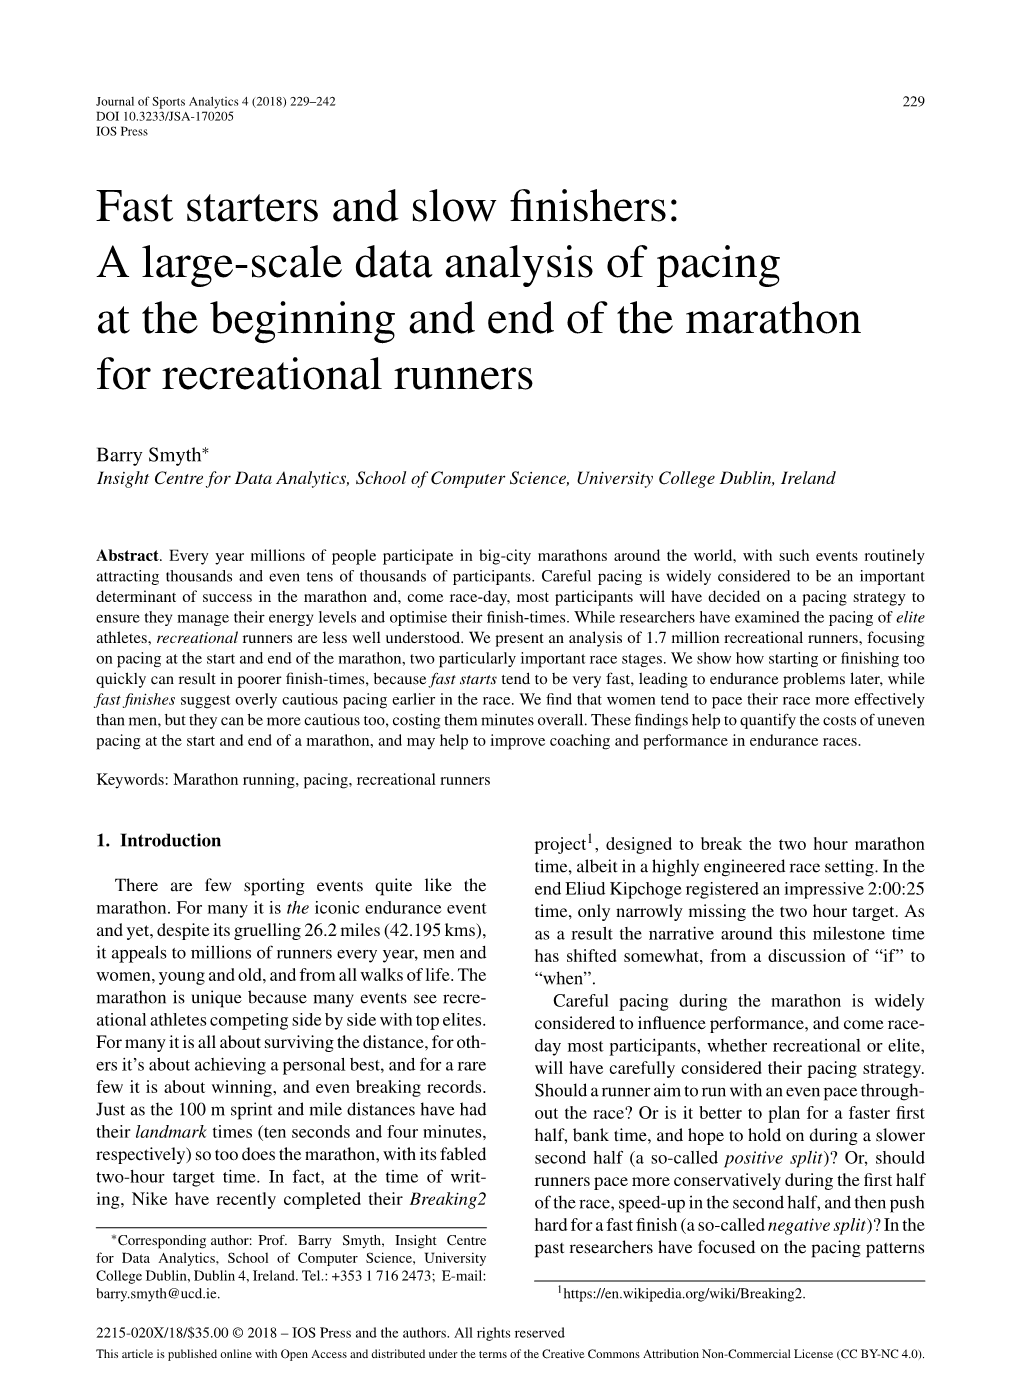 Fast Starters and Slow Finishers